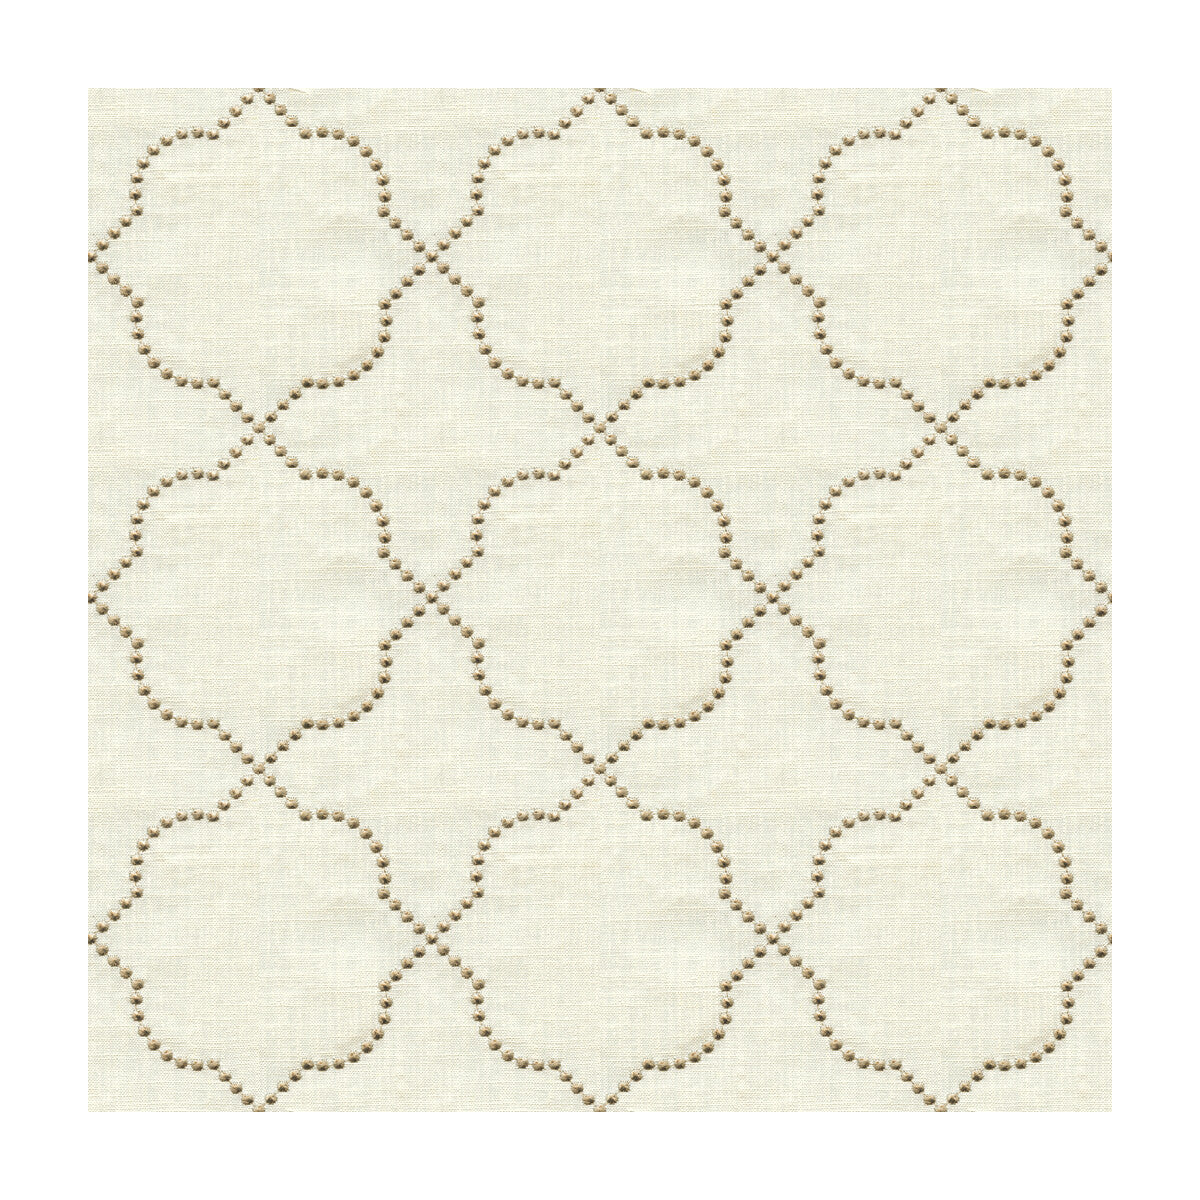 Tabari fabric in bone color - pattern 4072.116.0 - by Kravet Design in the Constantinople collection